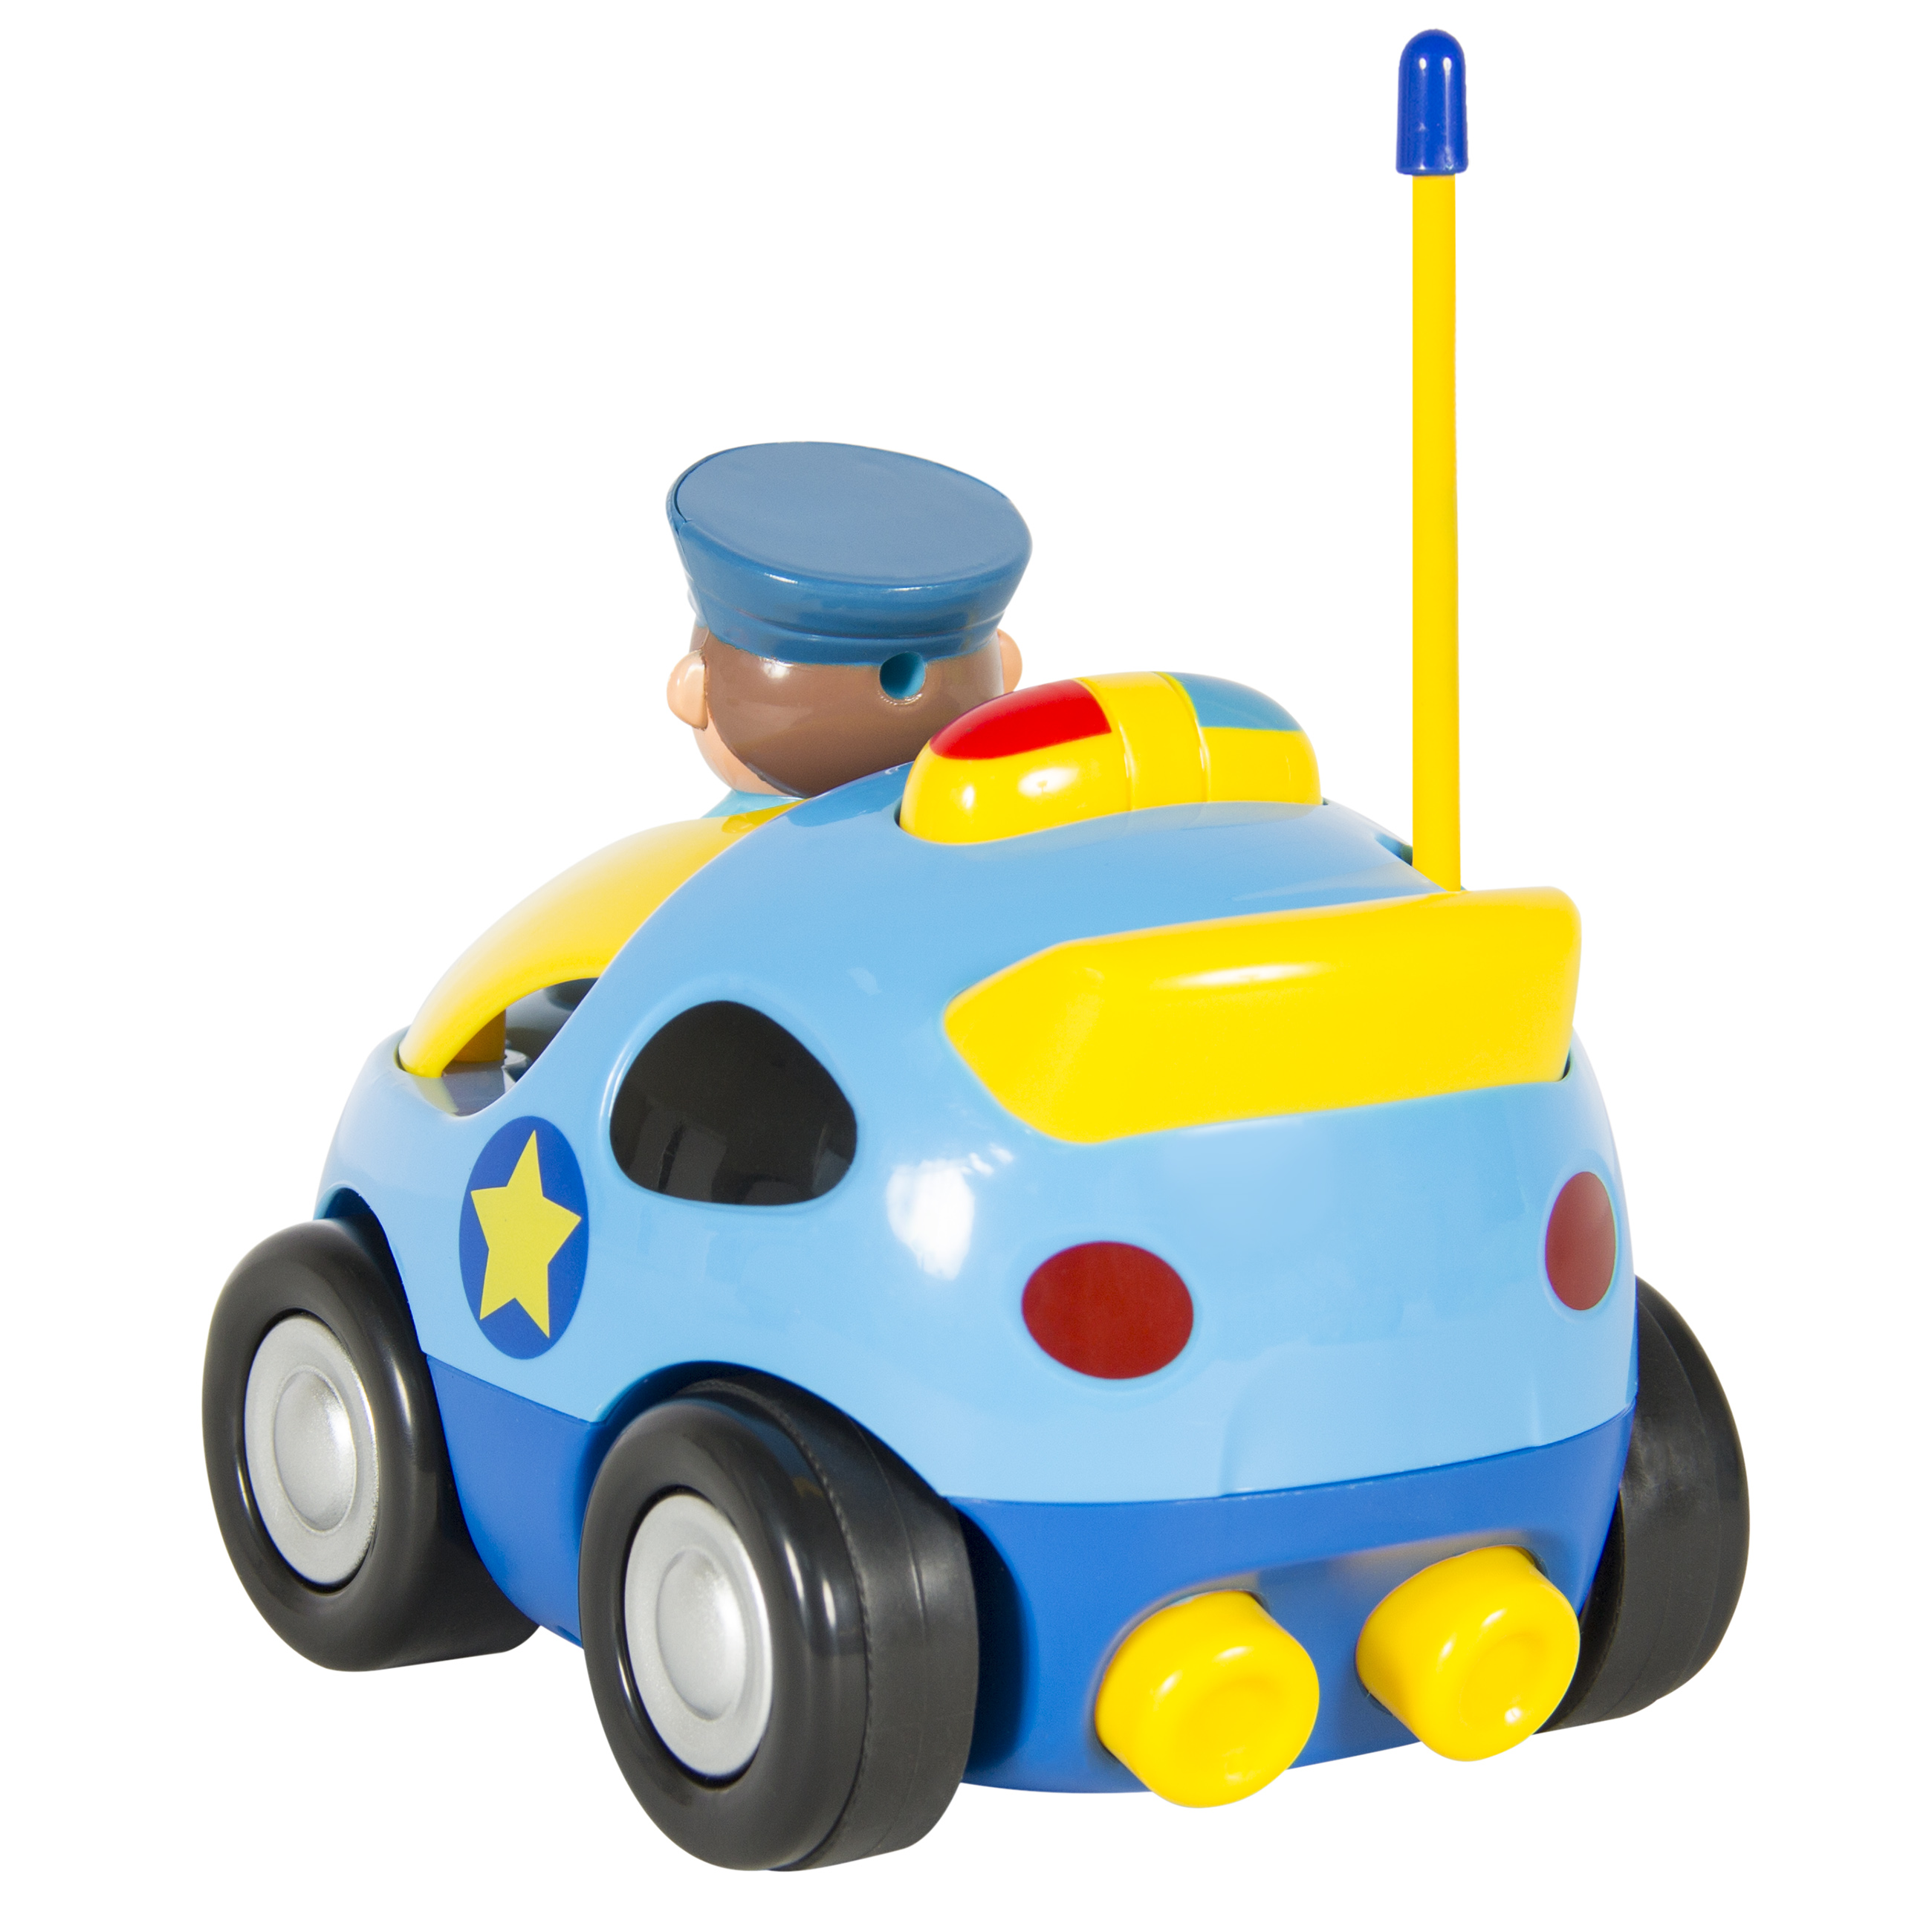 Best Choice Products 2-Channel Beginners Kids Remote Control Cartoon Police Car - Blue/Yellow - image 3 of 5